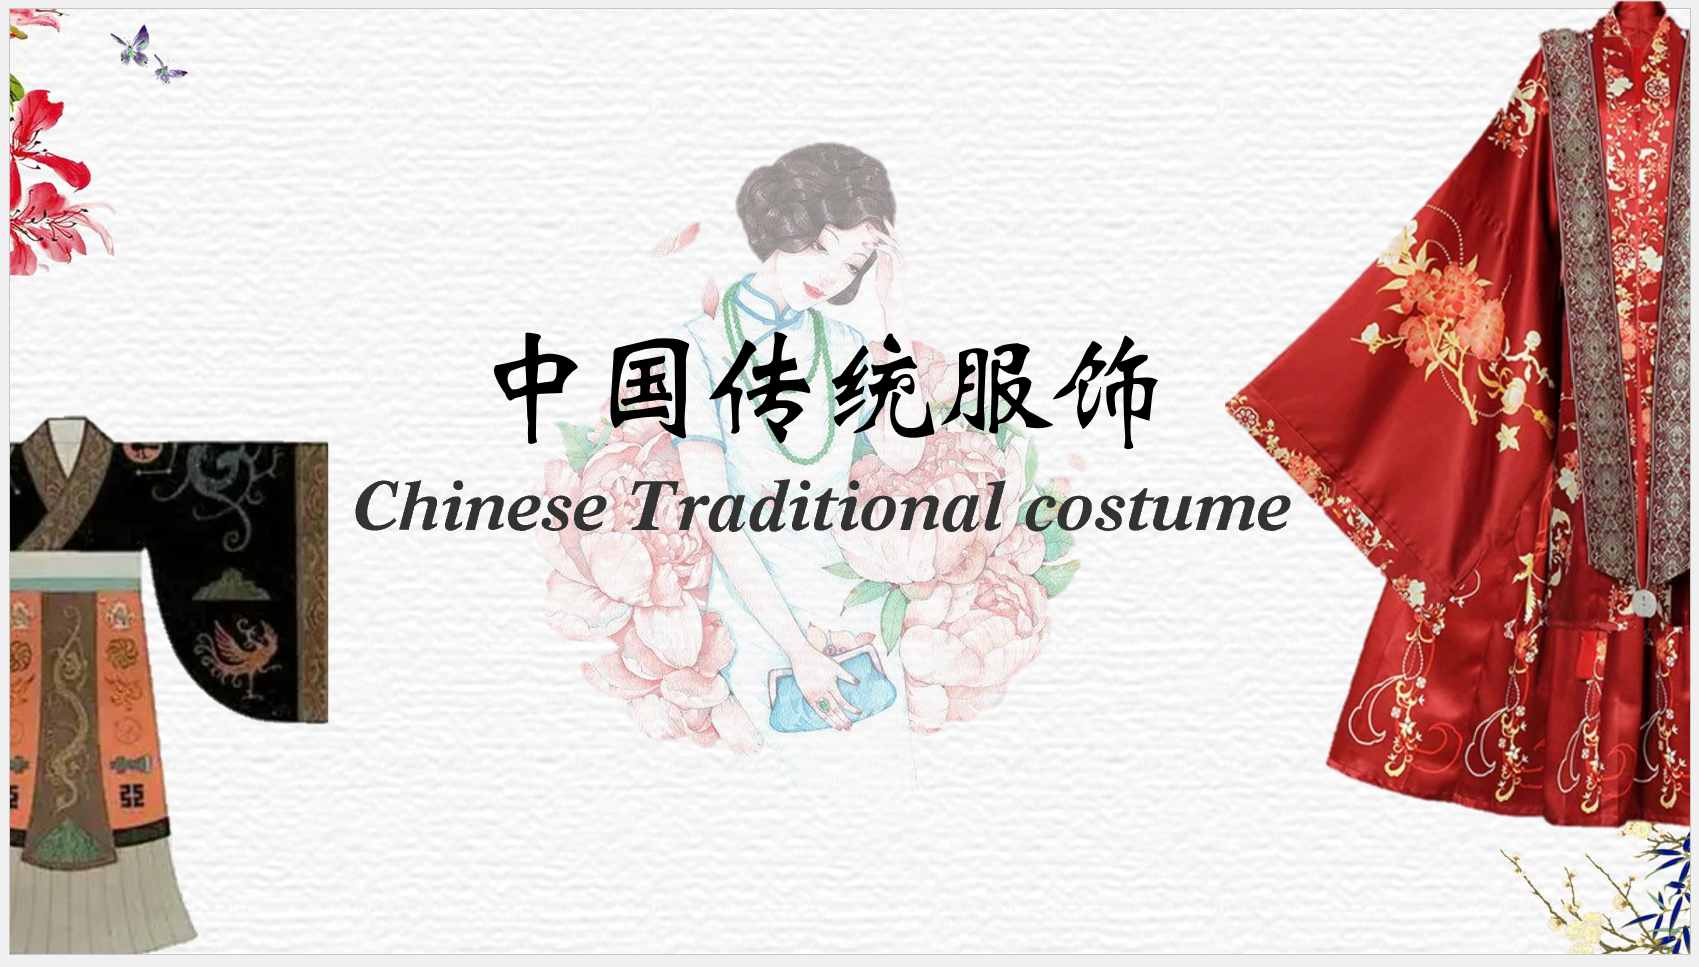 Chinese traditional costumes